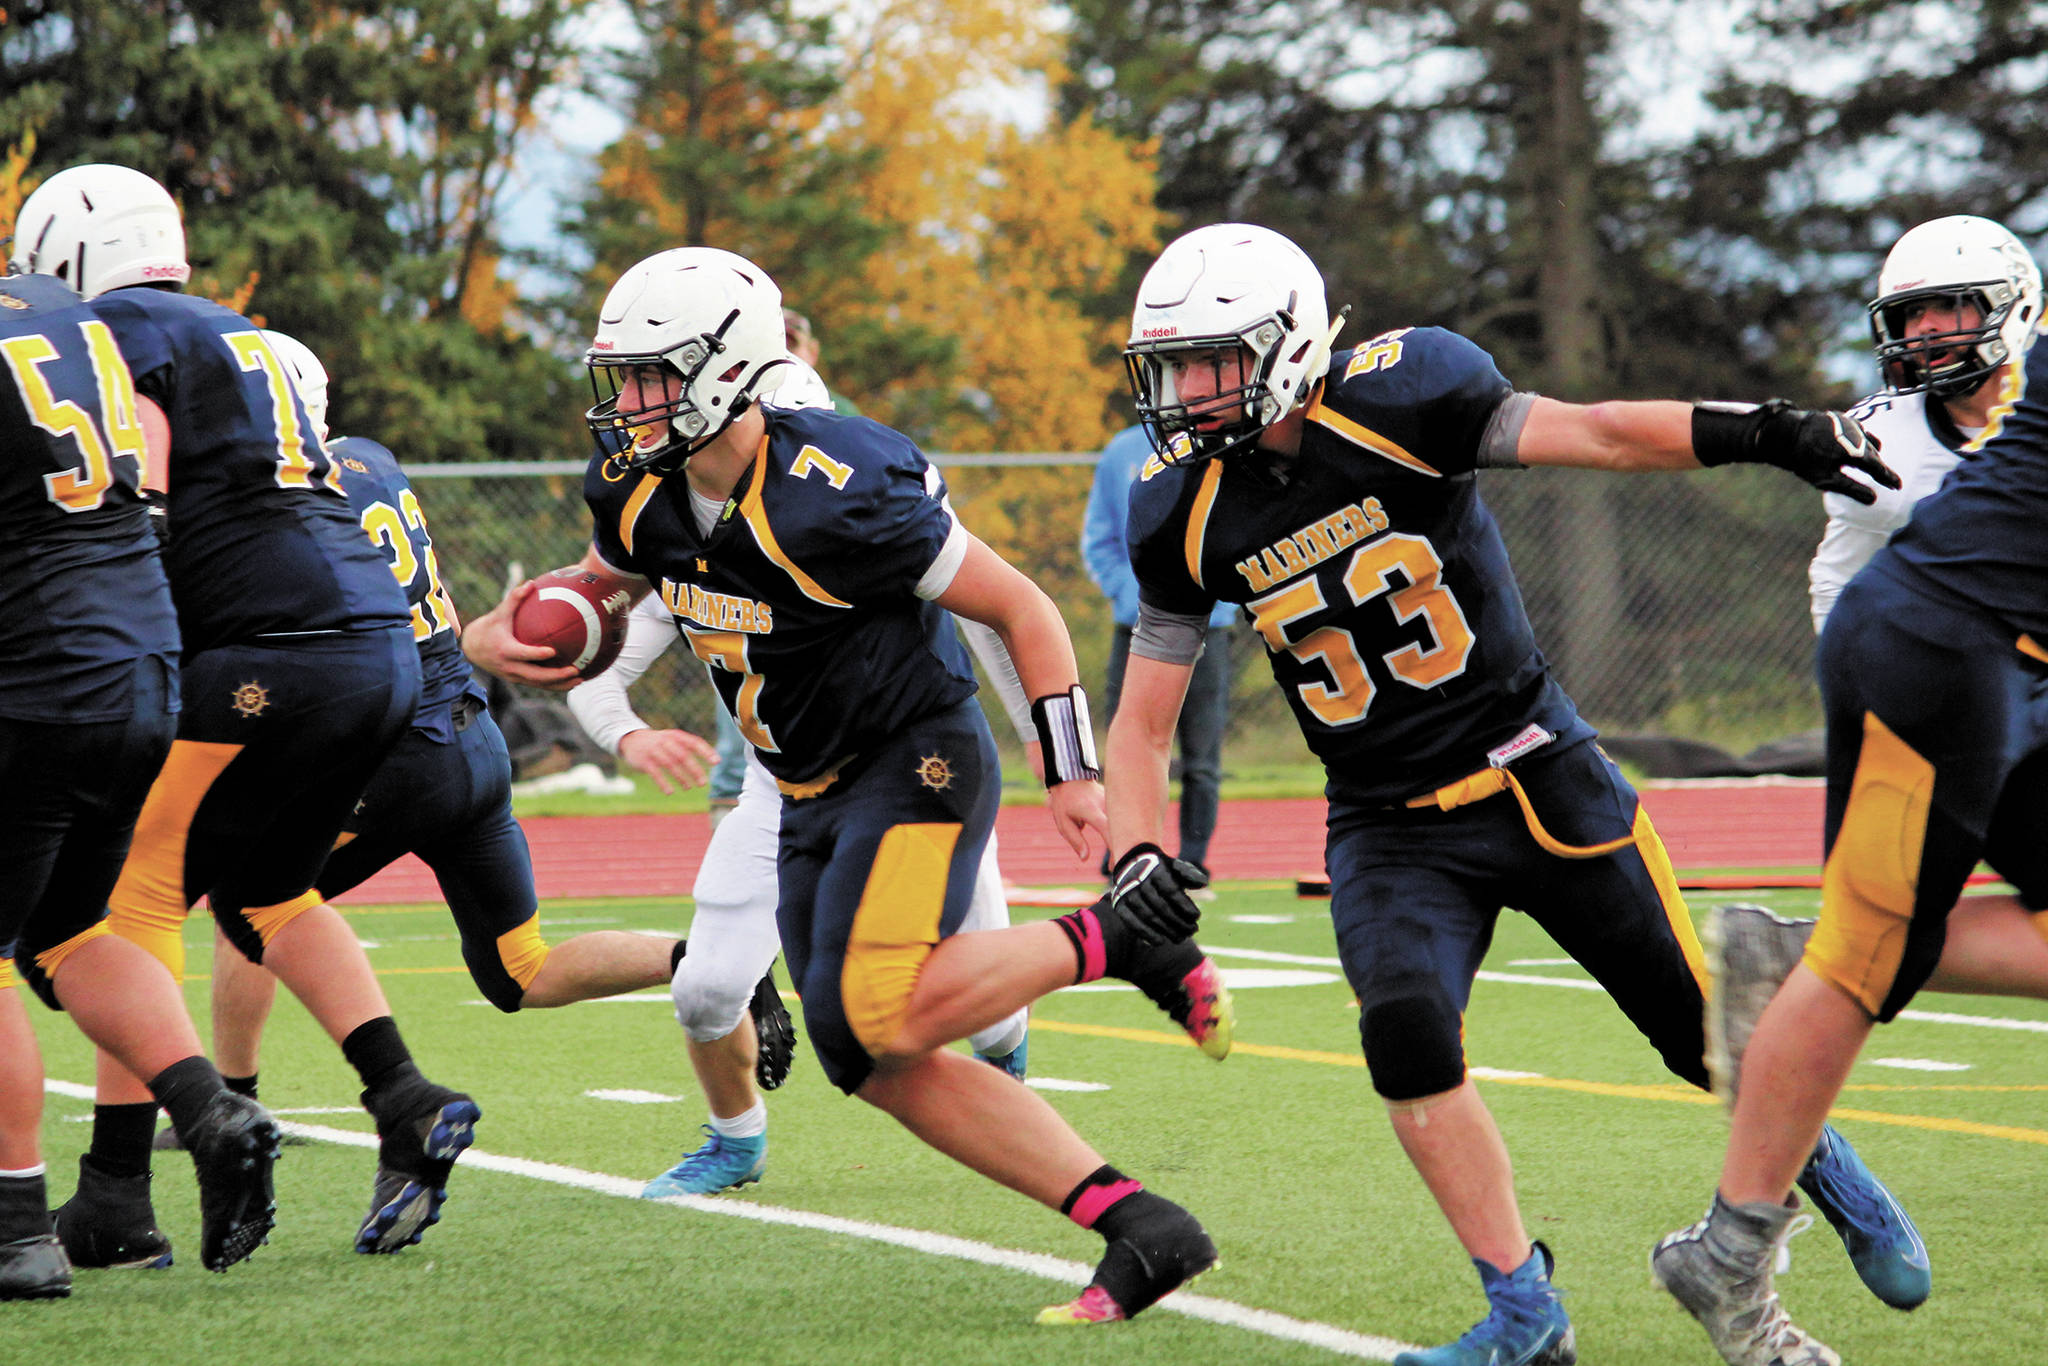 Homer quarterback Carter Tennison keeps the ball during a play in a Saturday, Oct. 3, 2020 football game against Soldotna High School at Homer High School in Homer, Alaska. (Photo by Megan Pacer/Homer News)